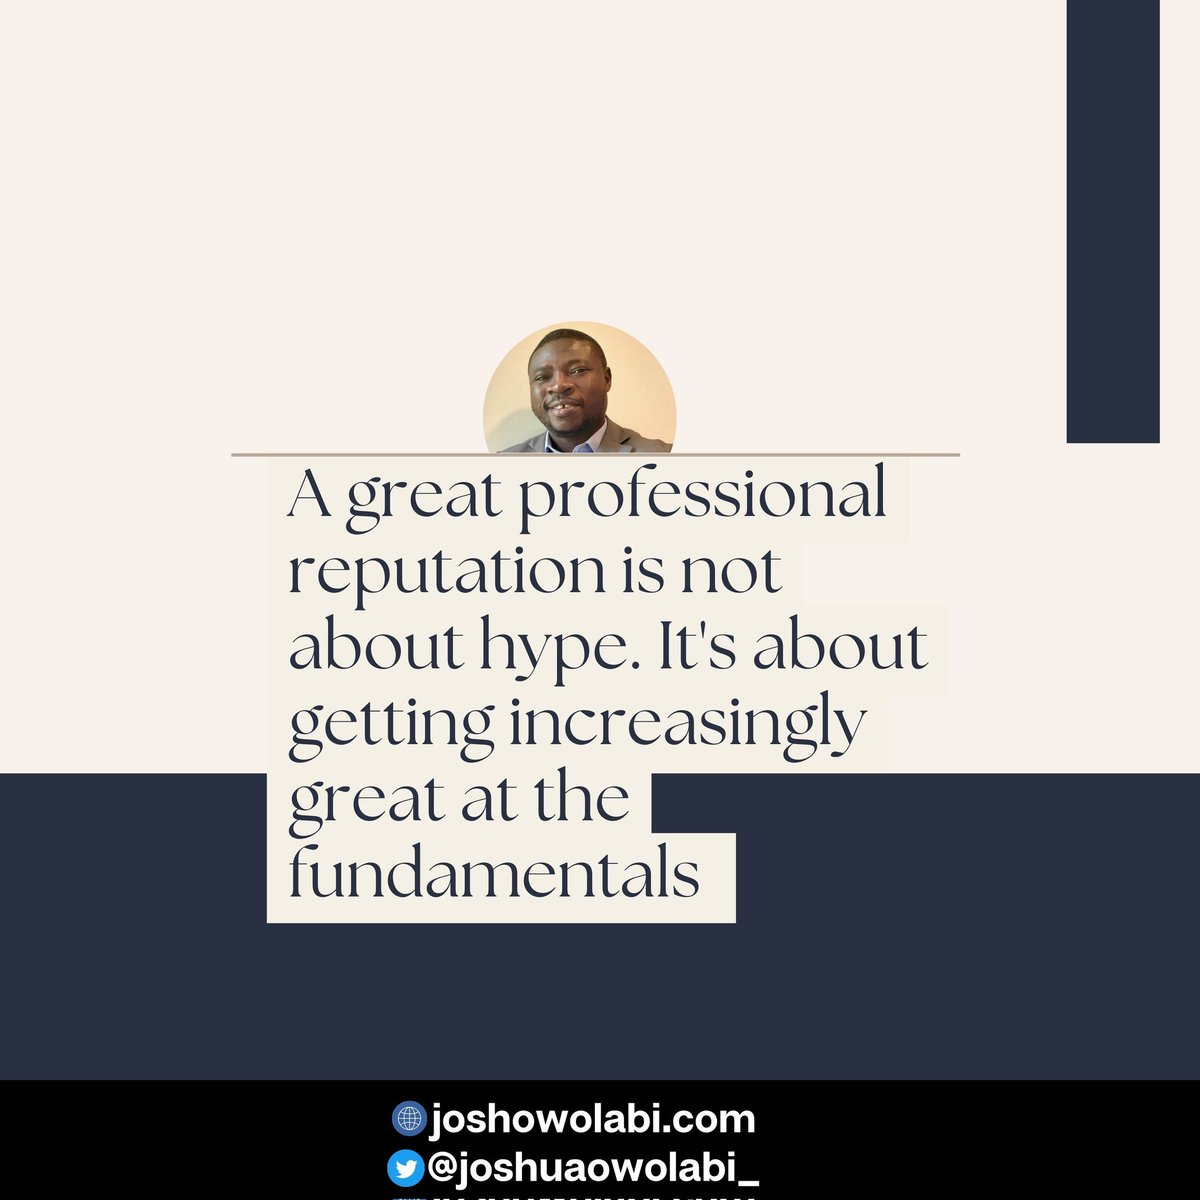 Whatever makes you do a better job, has the greatest impact on your reputation eventually because professional reputation always comes down to how well you do the things that you are paid to do. 
#reputation #reputationmatters #professionalgrowth